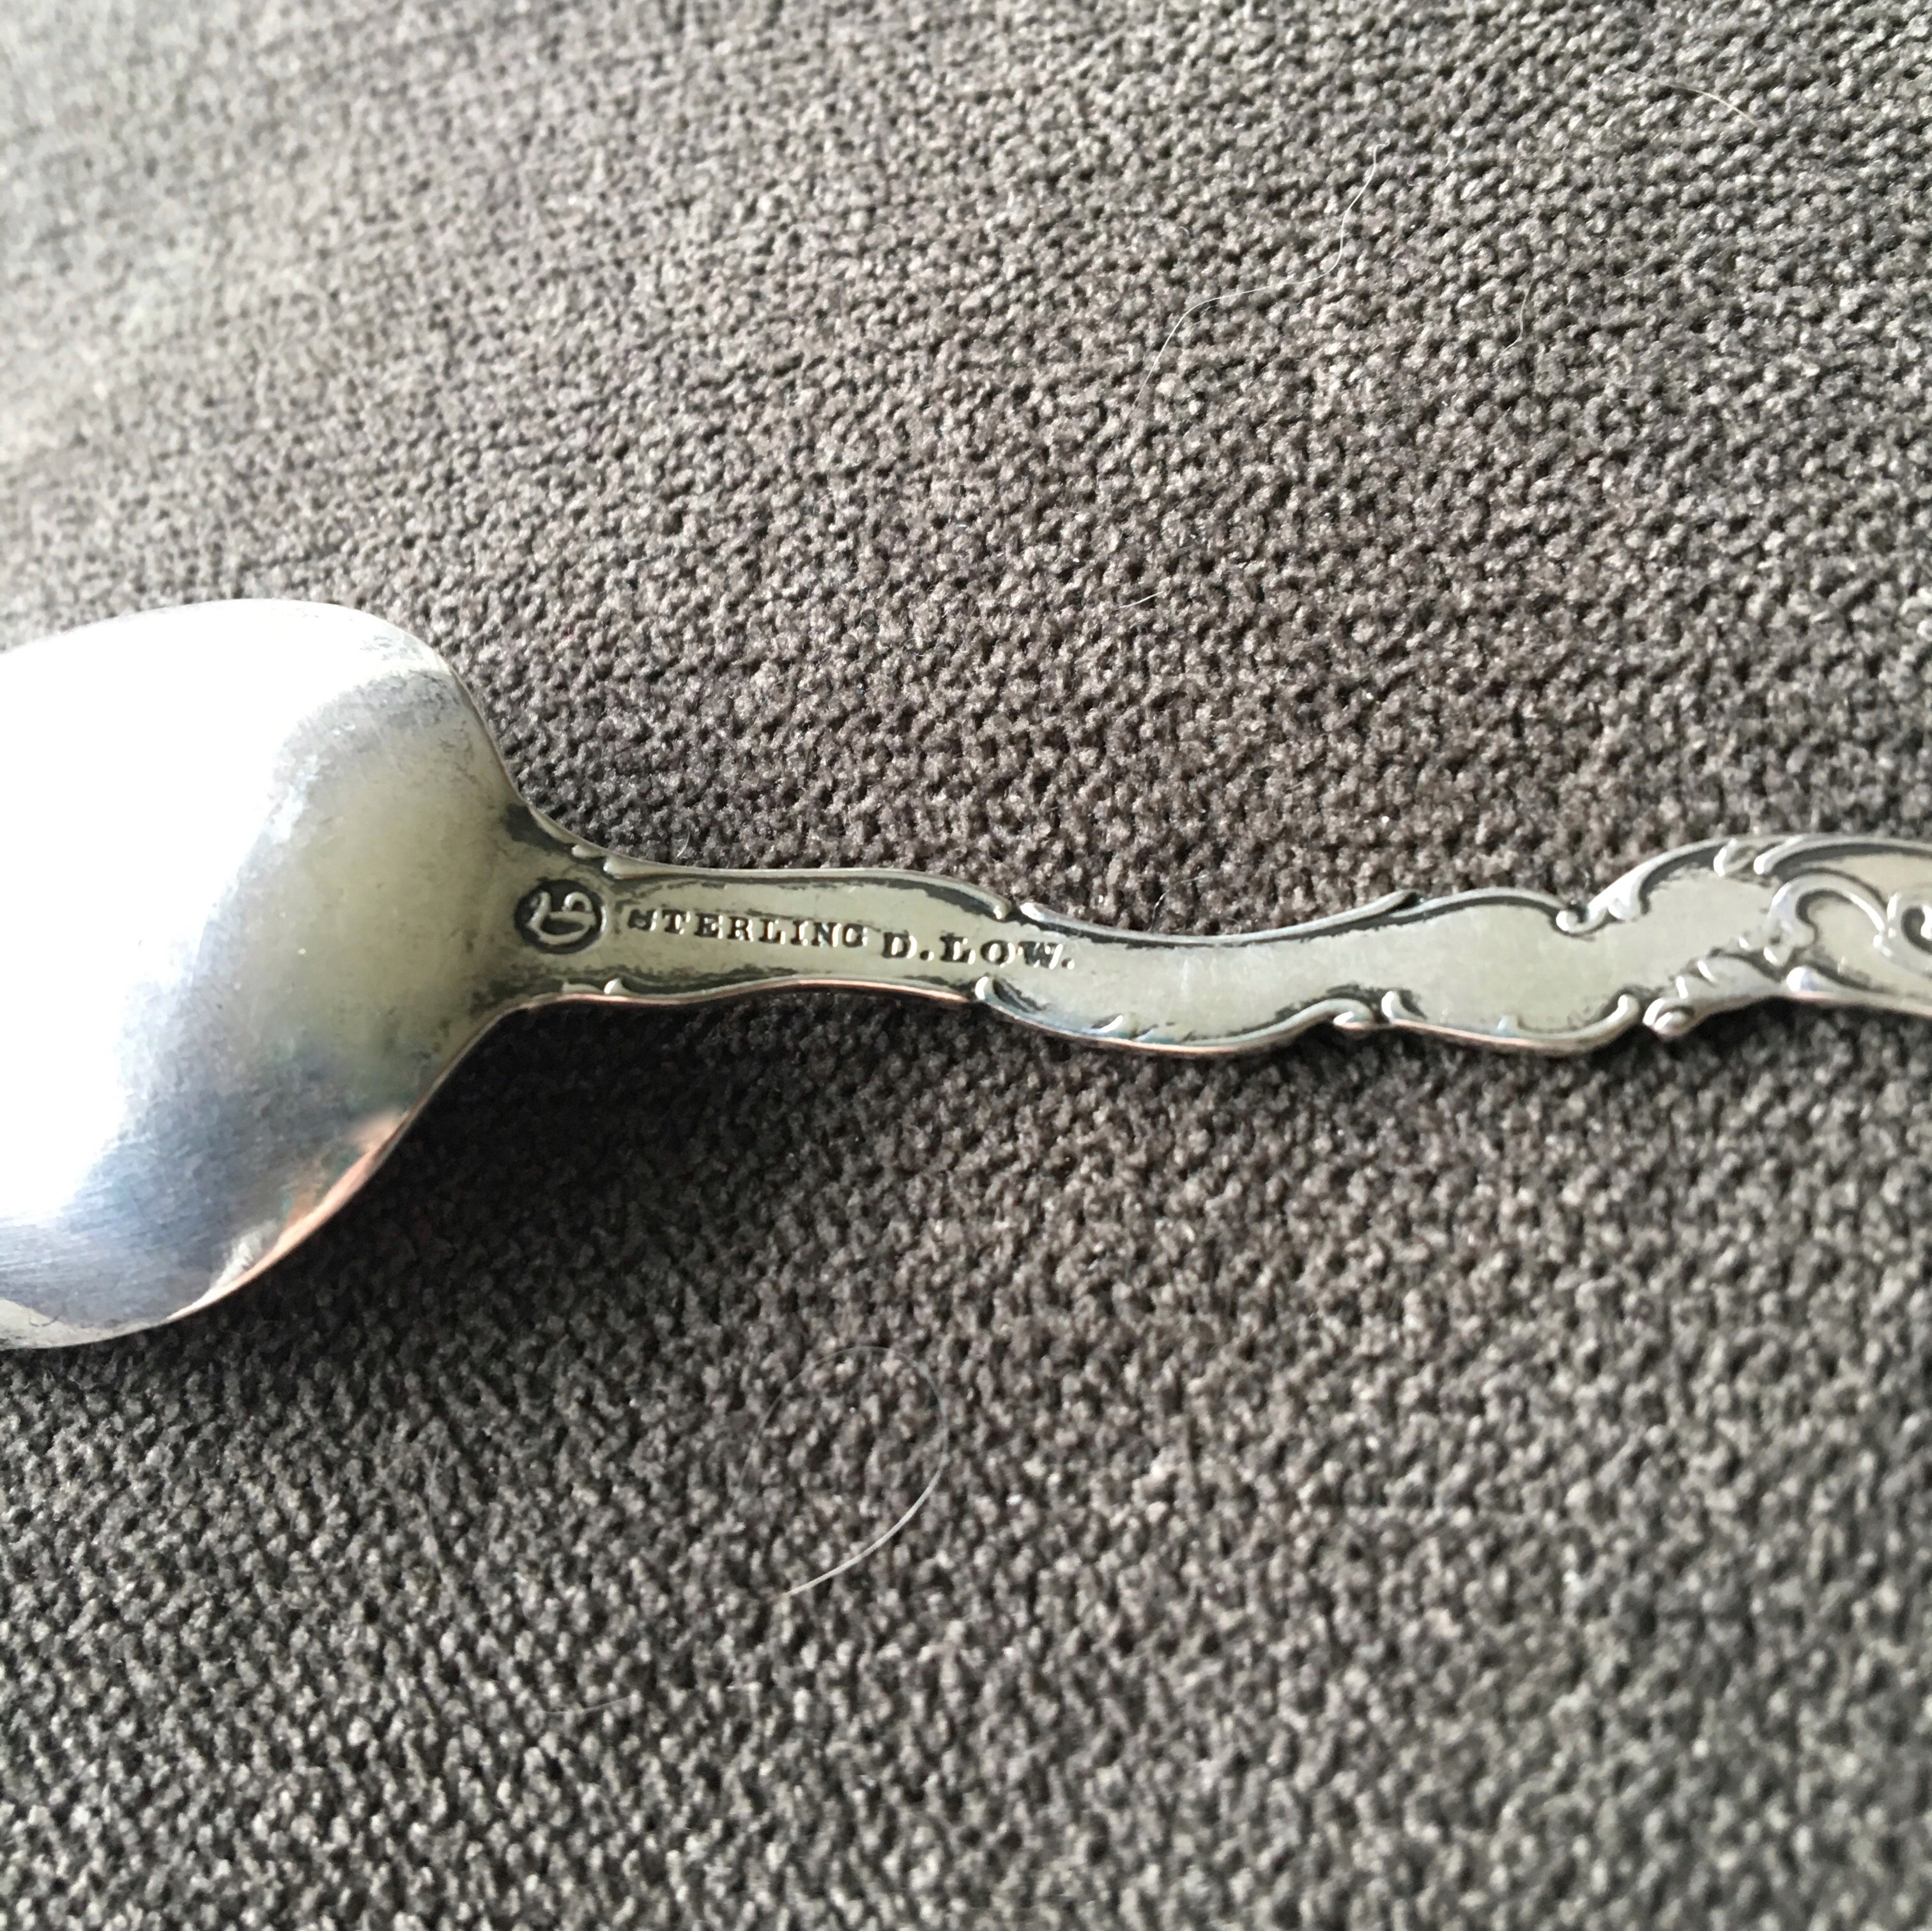 Image showing the silver marks on the back of the Nathaniel Hawthorne spoon.